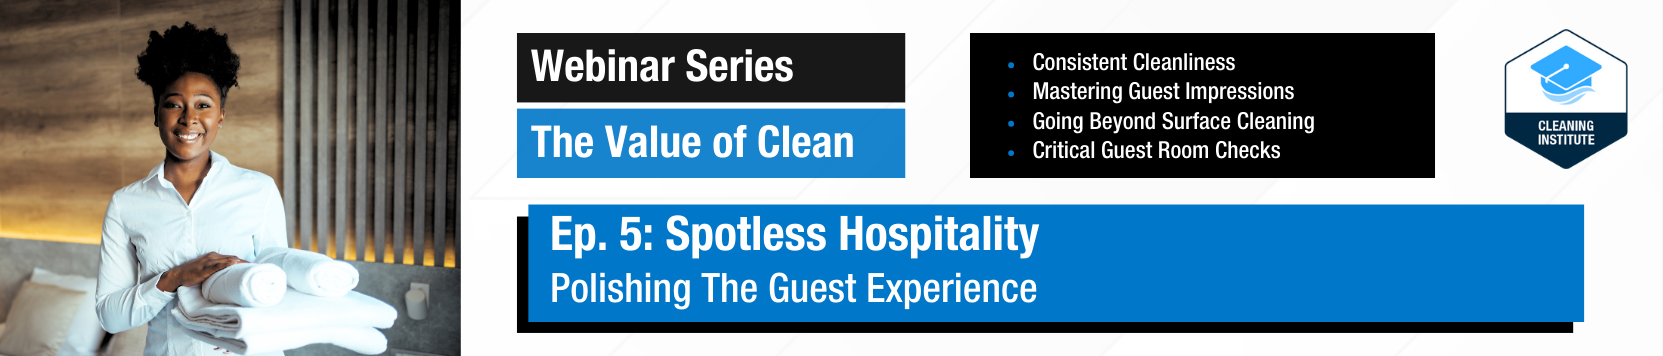 Free Hospitality Training for Hotels, Inns, AirBnbs and VRBO owners